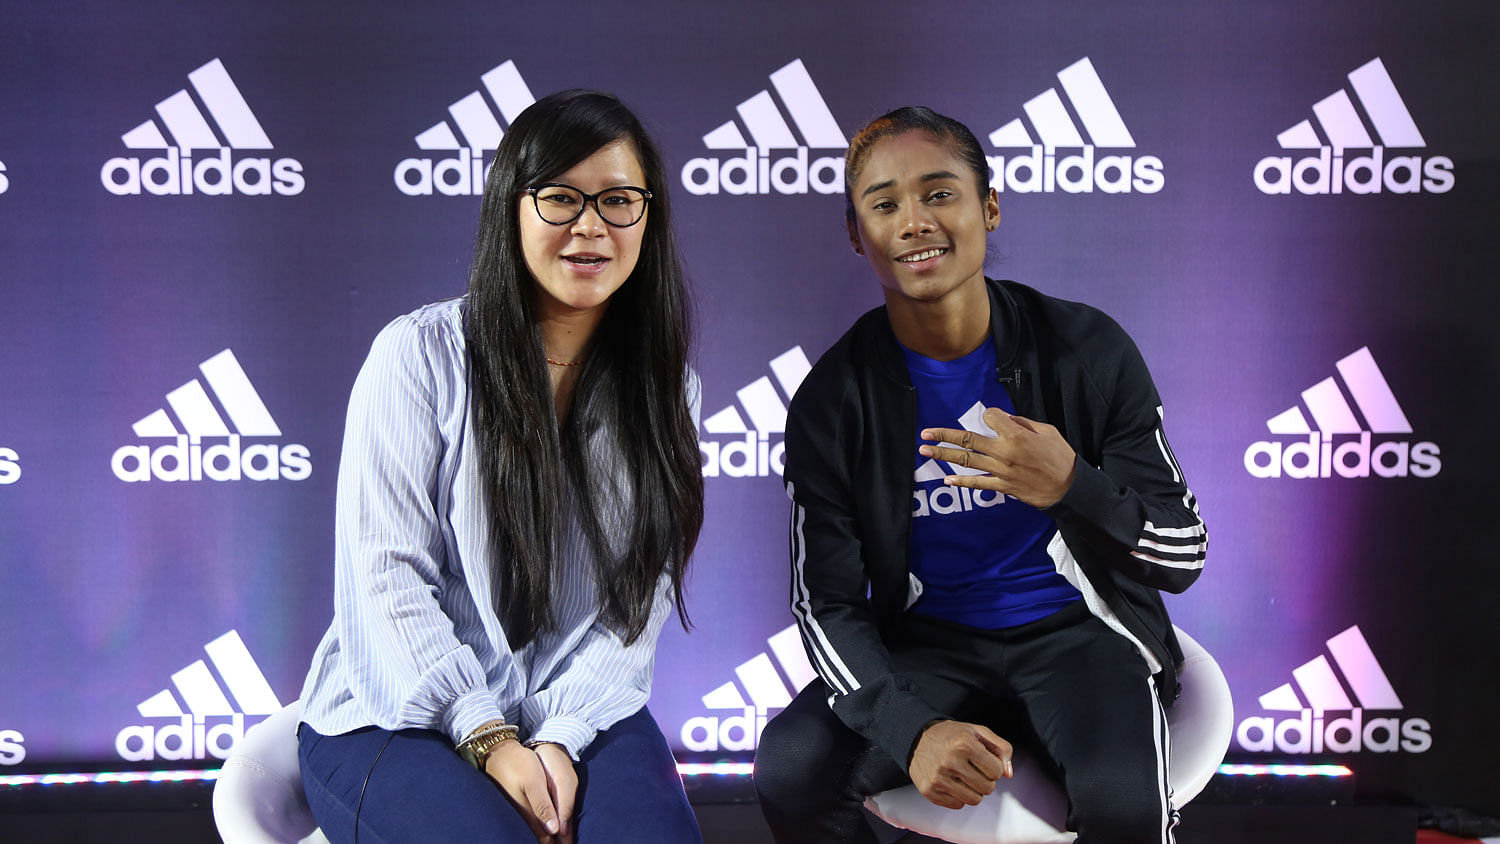 Just 18, Hima Das is the national record-holder in the 400m race, an event she started competing in professionally only this year.